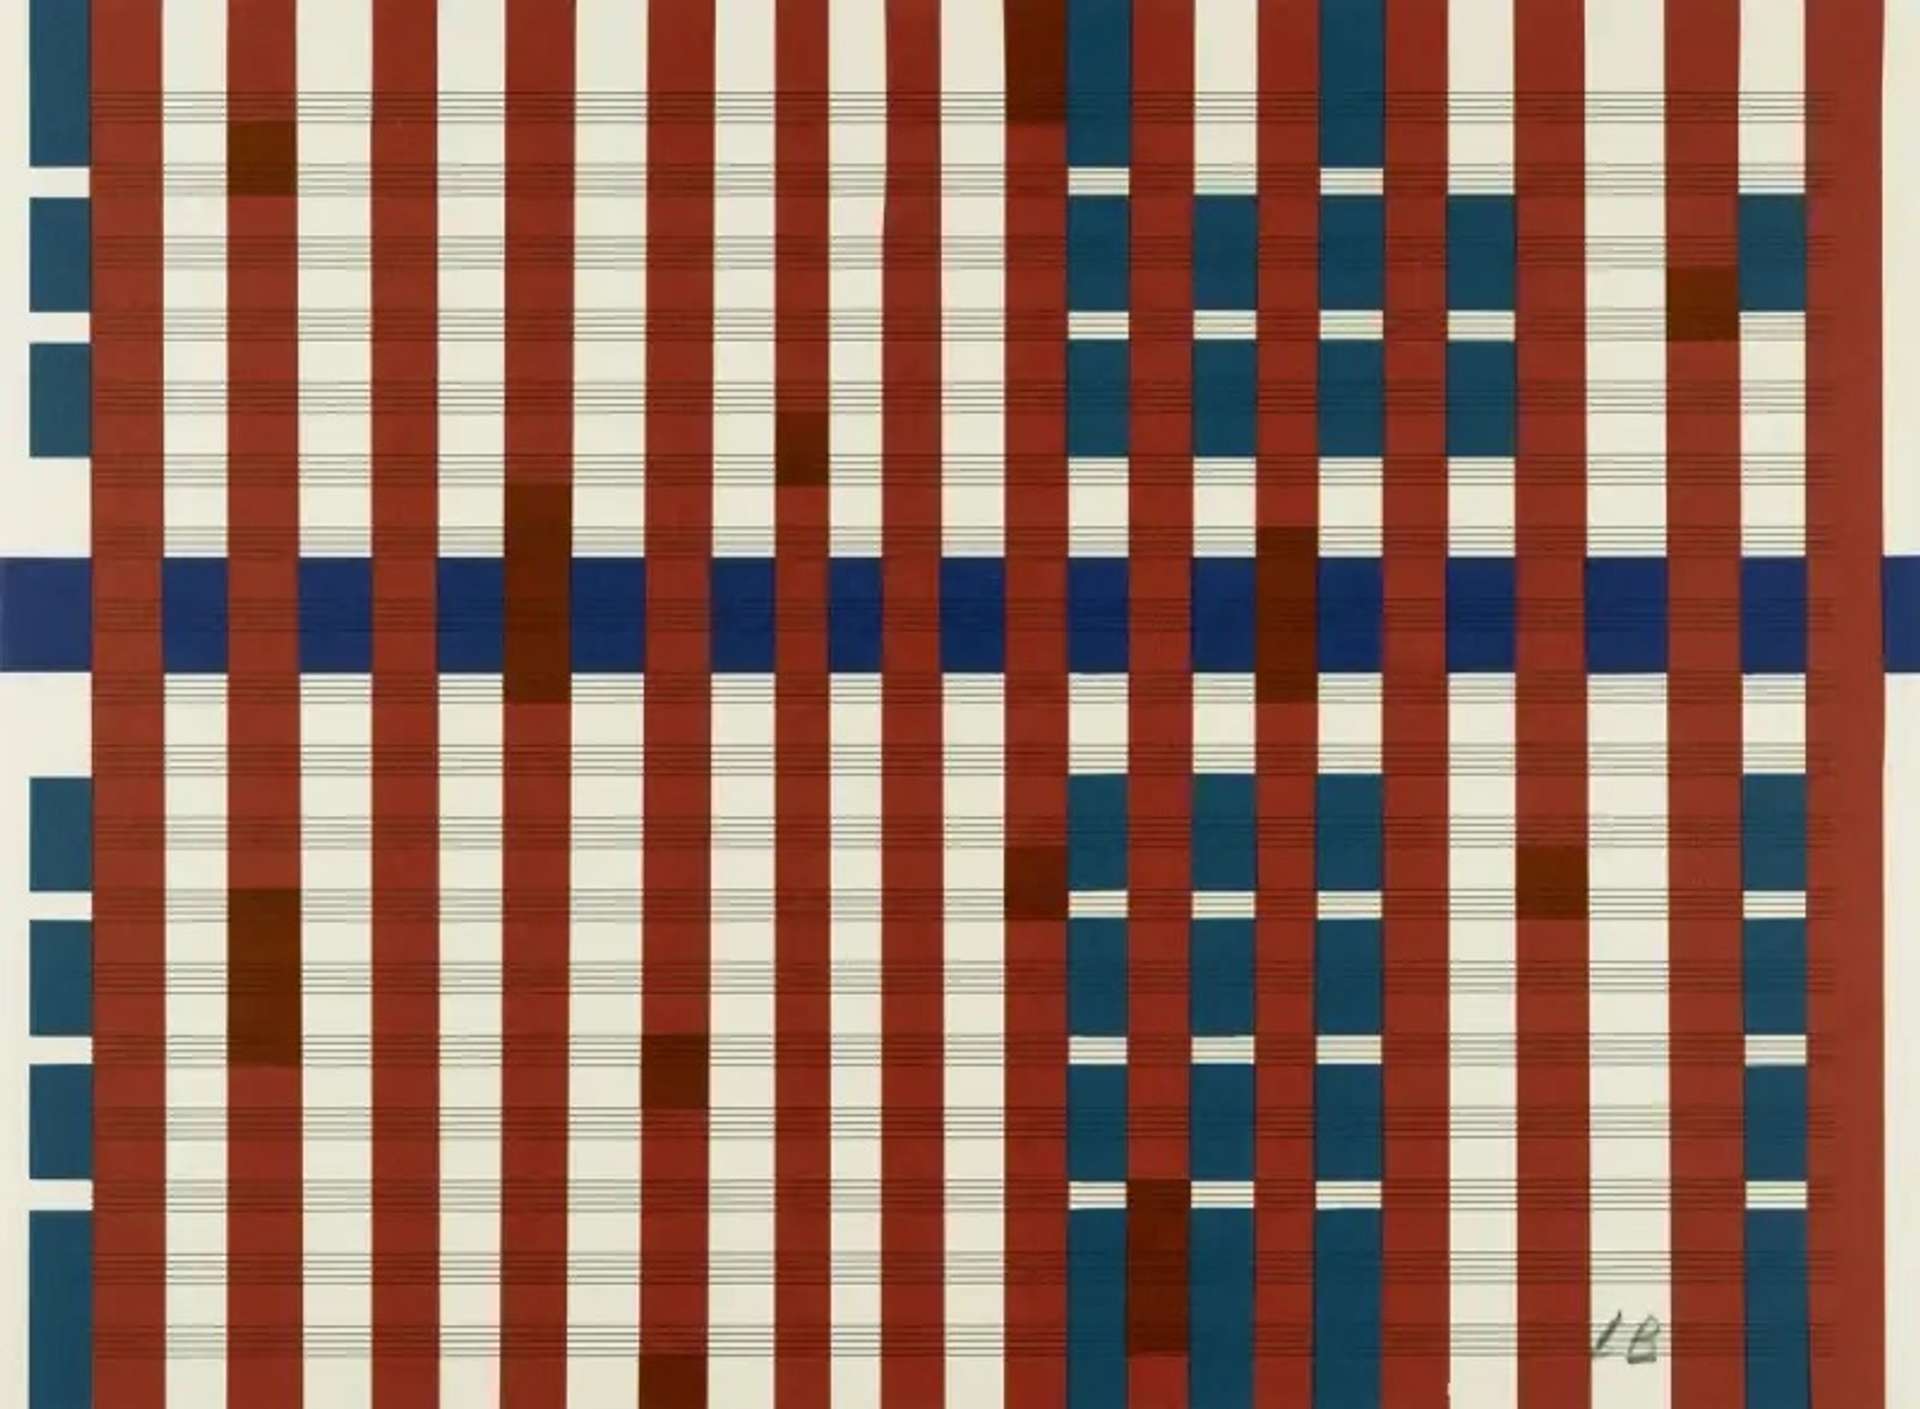 Louise Bourgeois’ Untitled #18. A screenprint of red and blue lines and rectangles against a pattern of horizontal lines